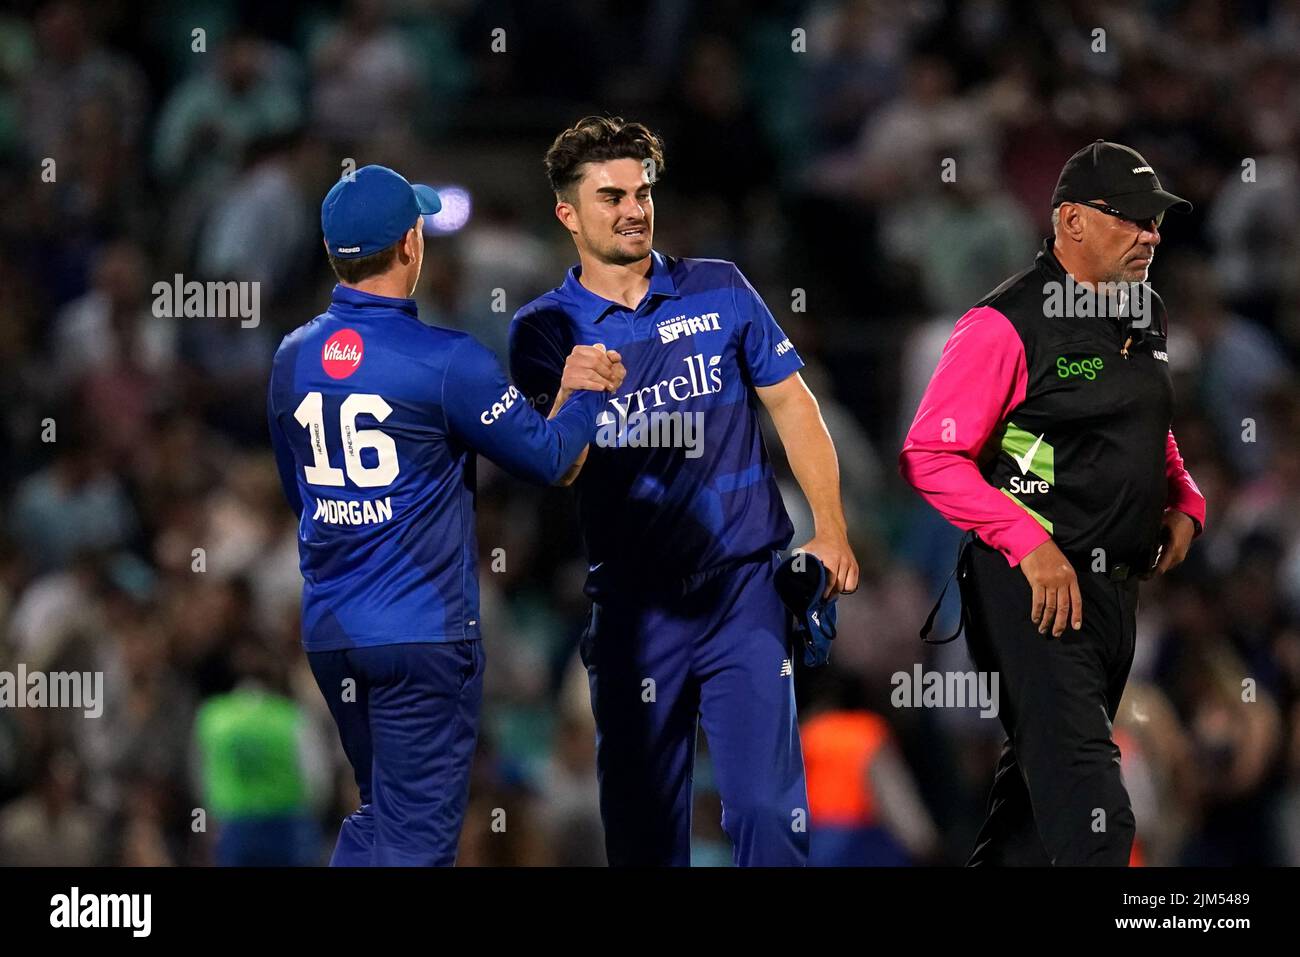 London Spirit's Jordan Thompson celebrates their victory at the end of the match with captain Eoin Morgan, (left) during The Hundred match at The Kia Oval, London. Picture date: Thursday August 4, 2022. Stock Photo